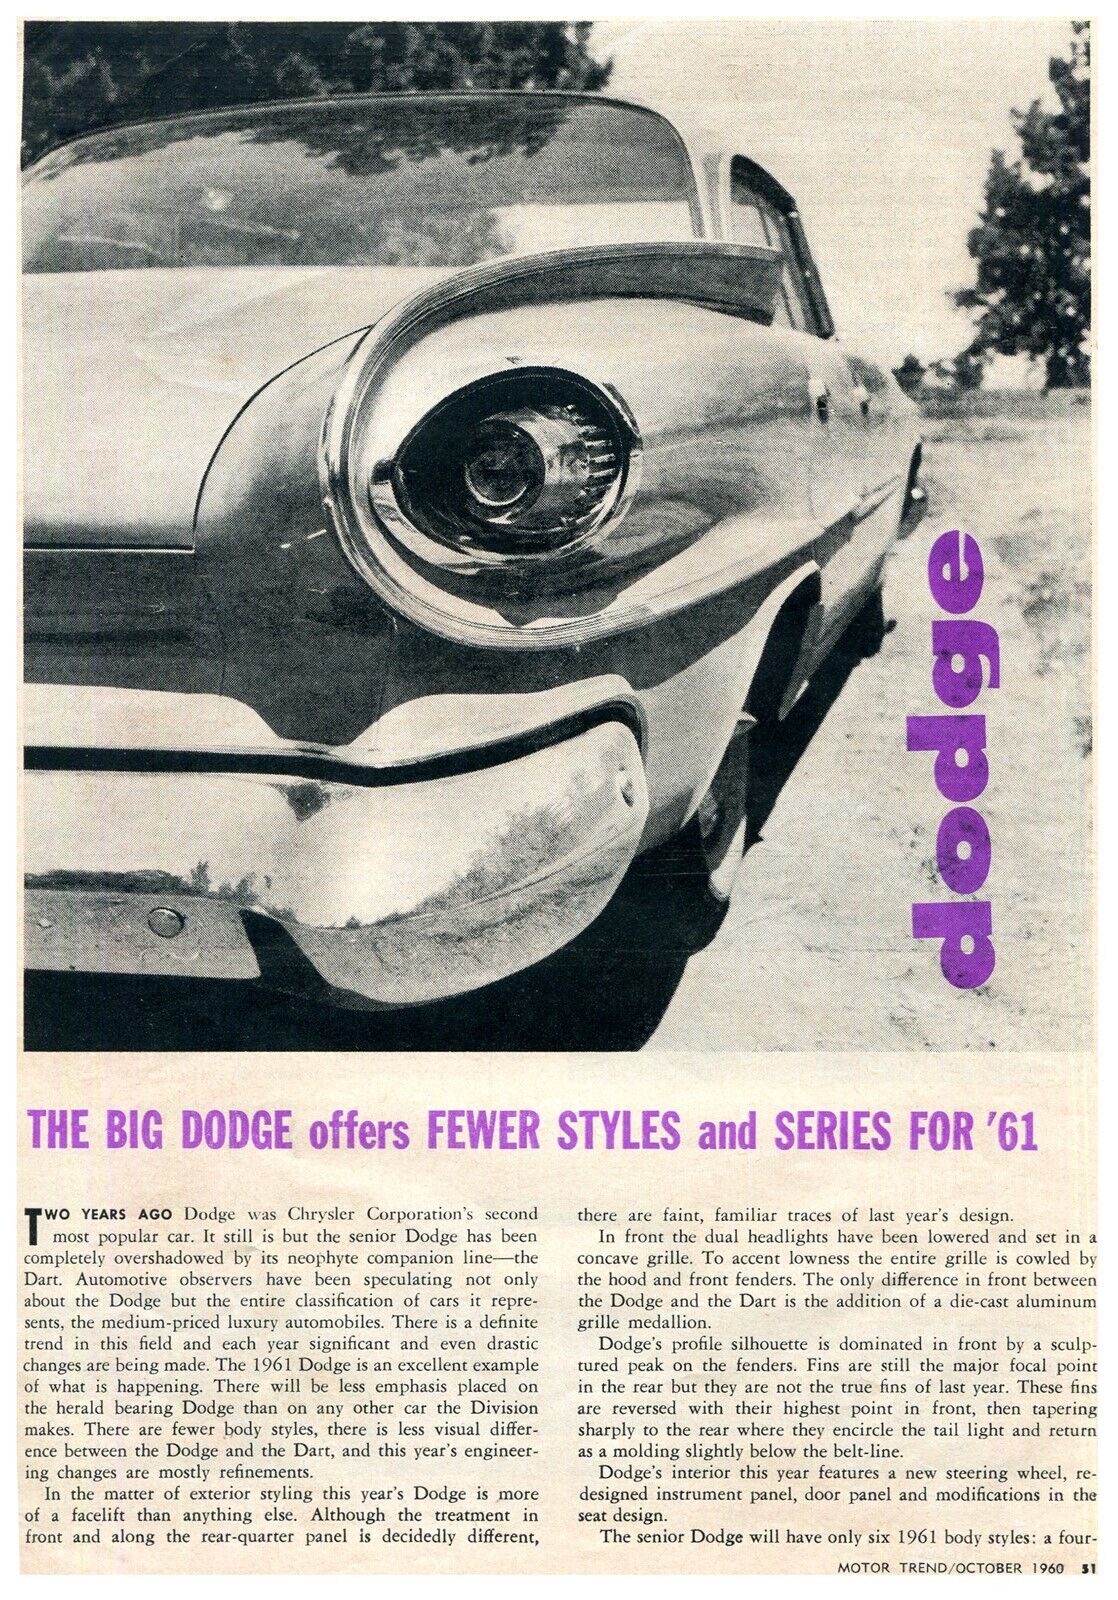 1961 DODGE POLARA INTRODUCTION 3 page ARTICLE